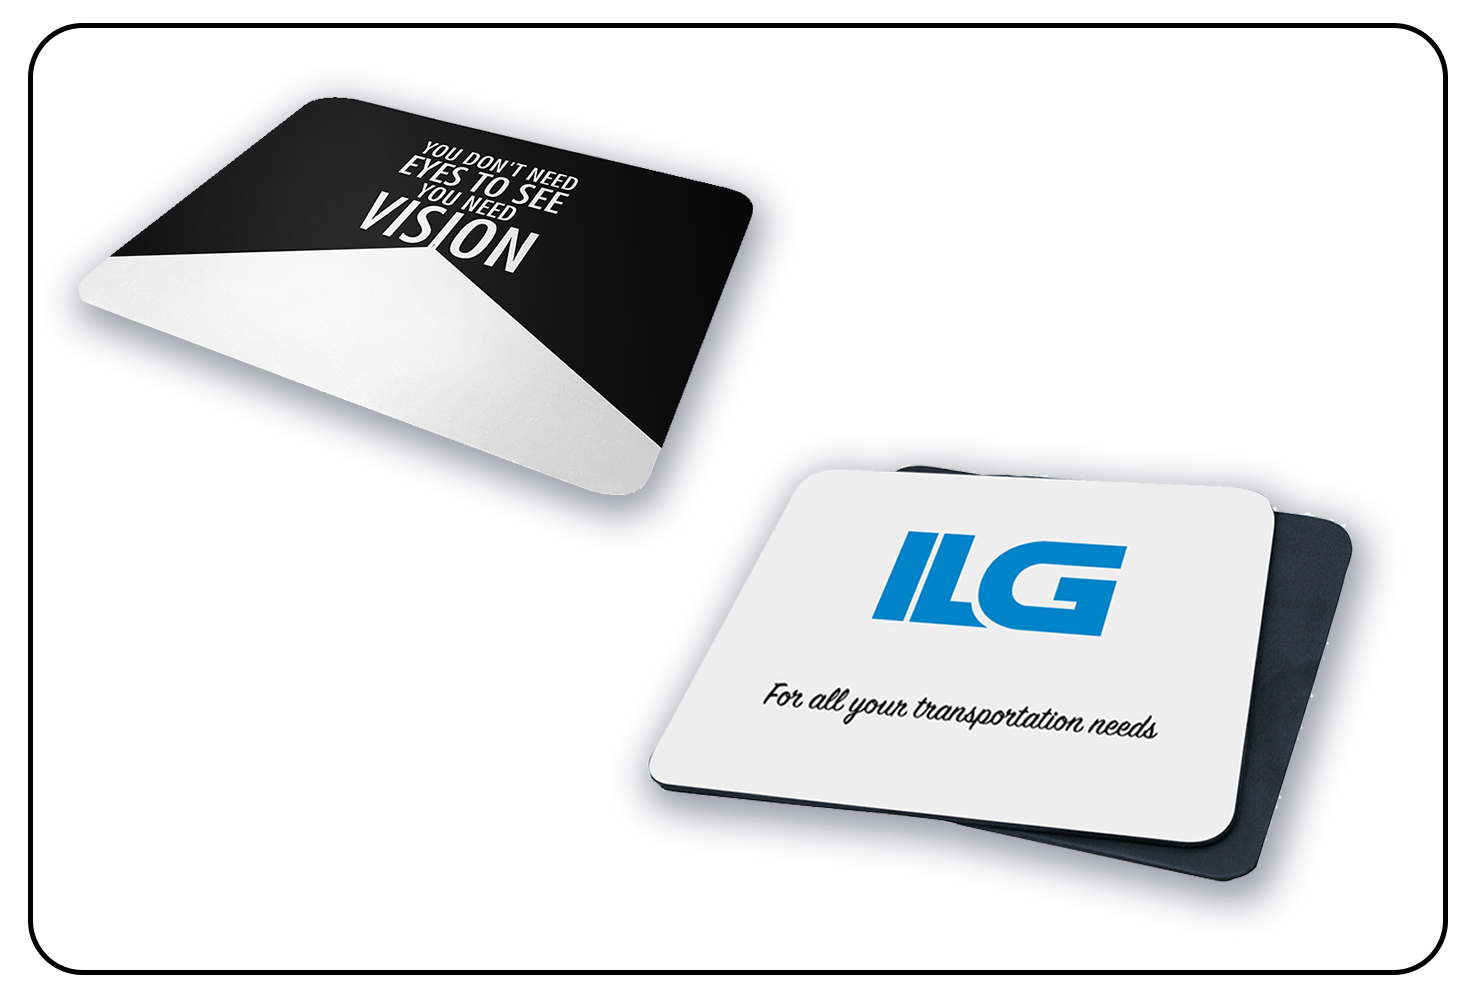 Personalized mouse pad for comfortable computing.